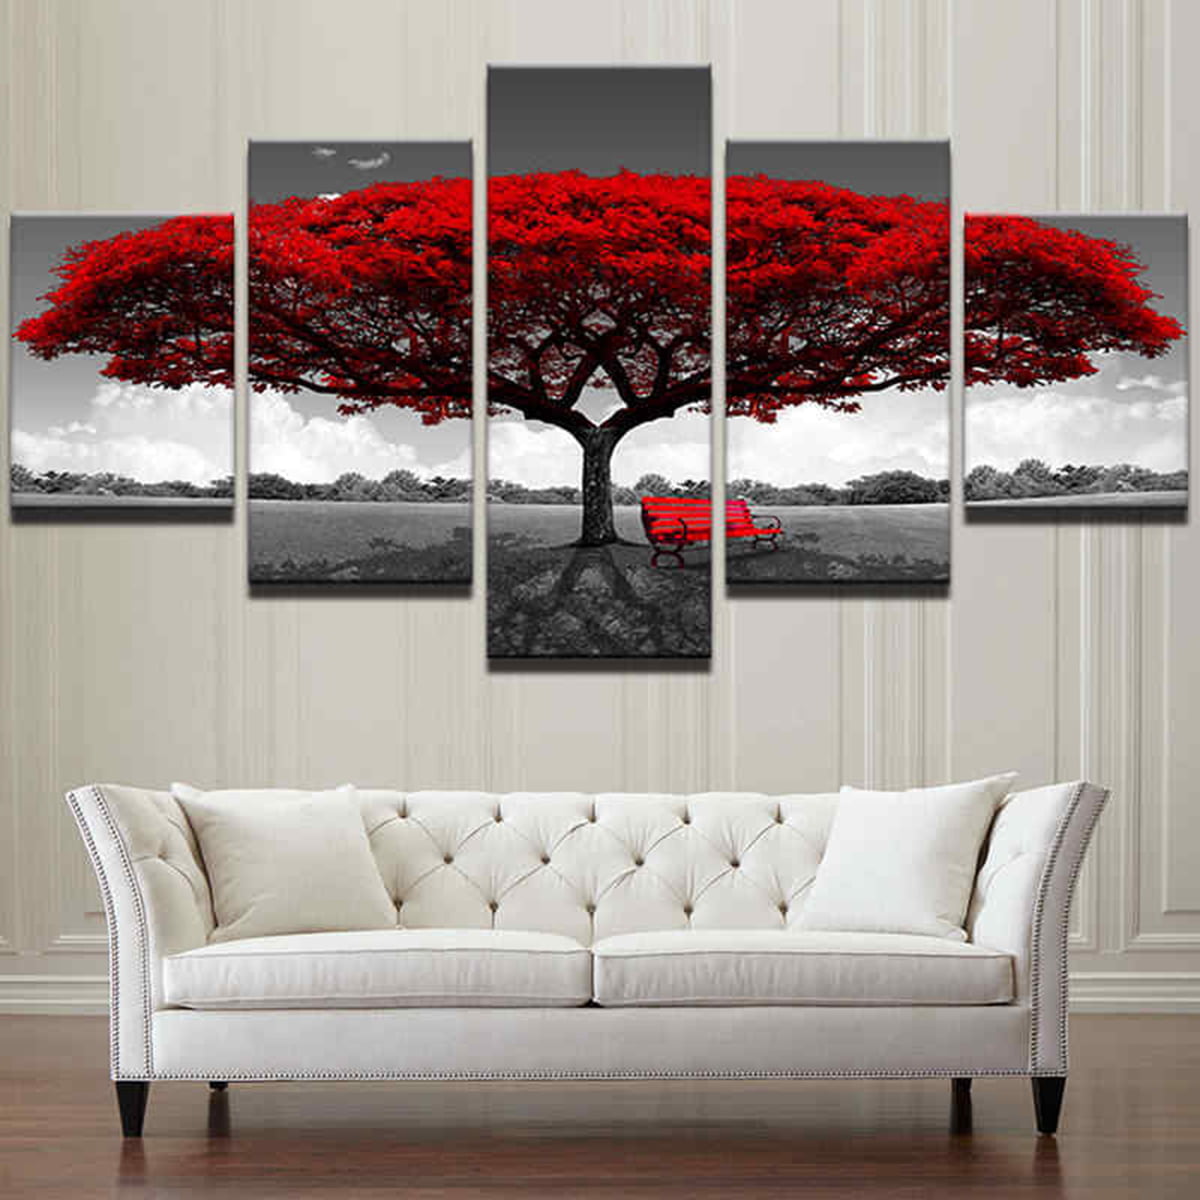 No-Frame 5 Panels Big Size Canvas Print Pictures Modern Red Tree